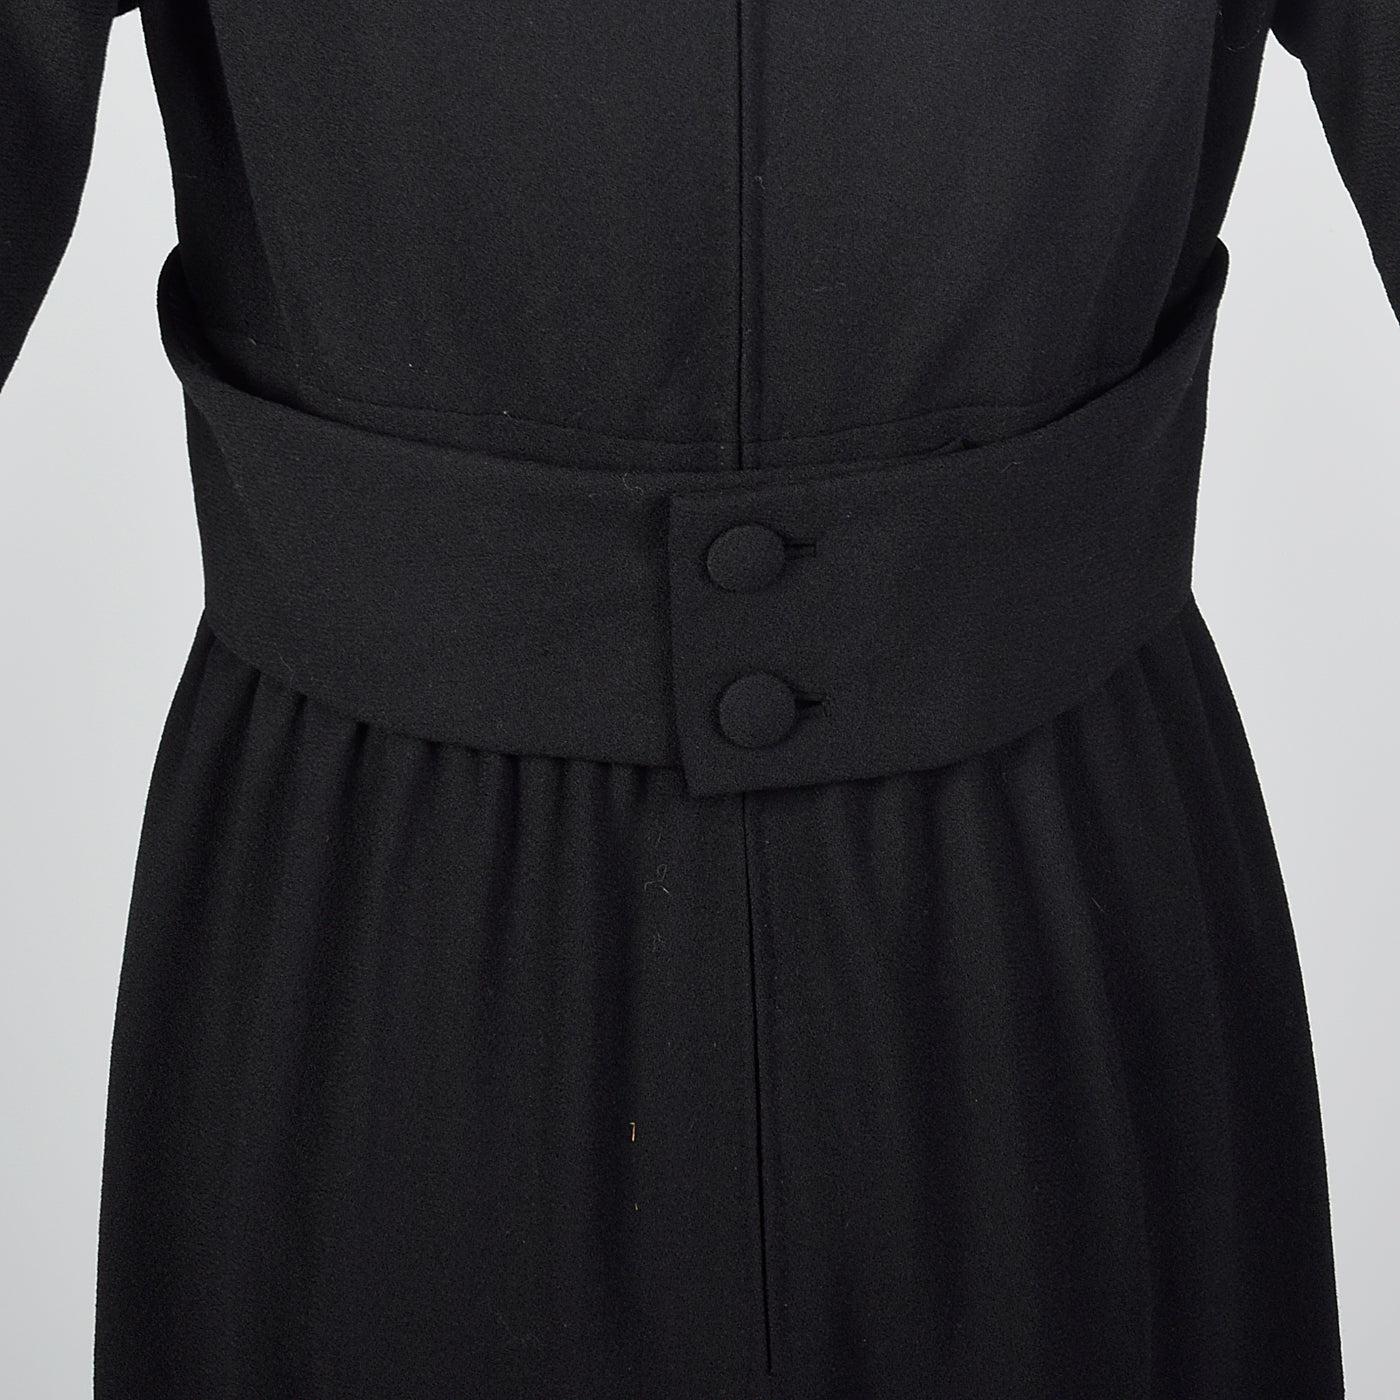 1970s Norman Norell Long Sleeve Little Black Dress in Winter Weight Wool, Gustave Tassell